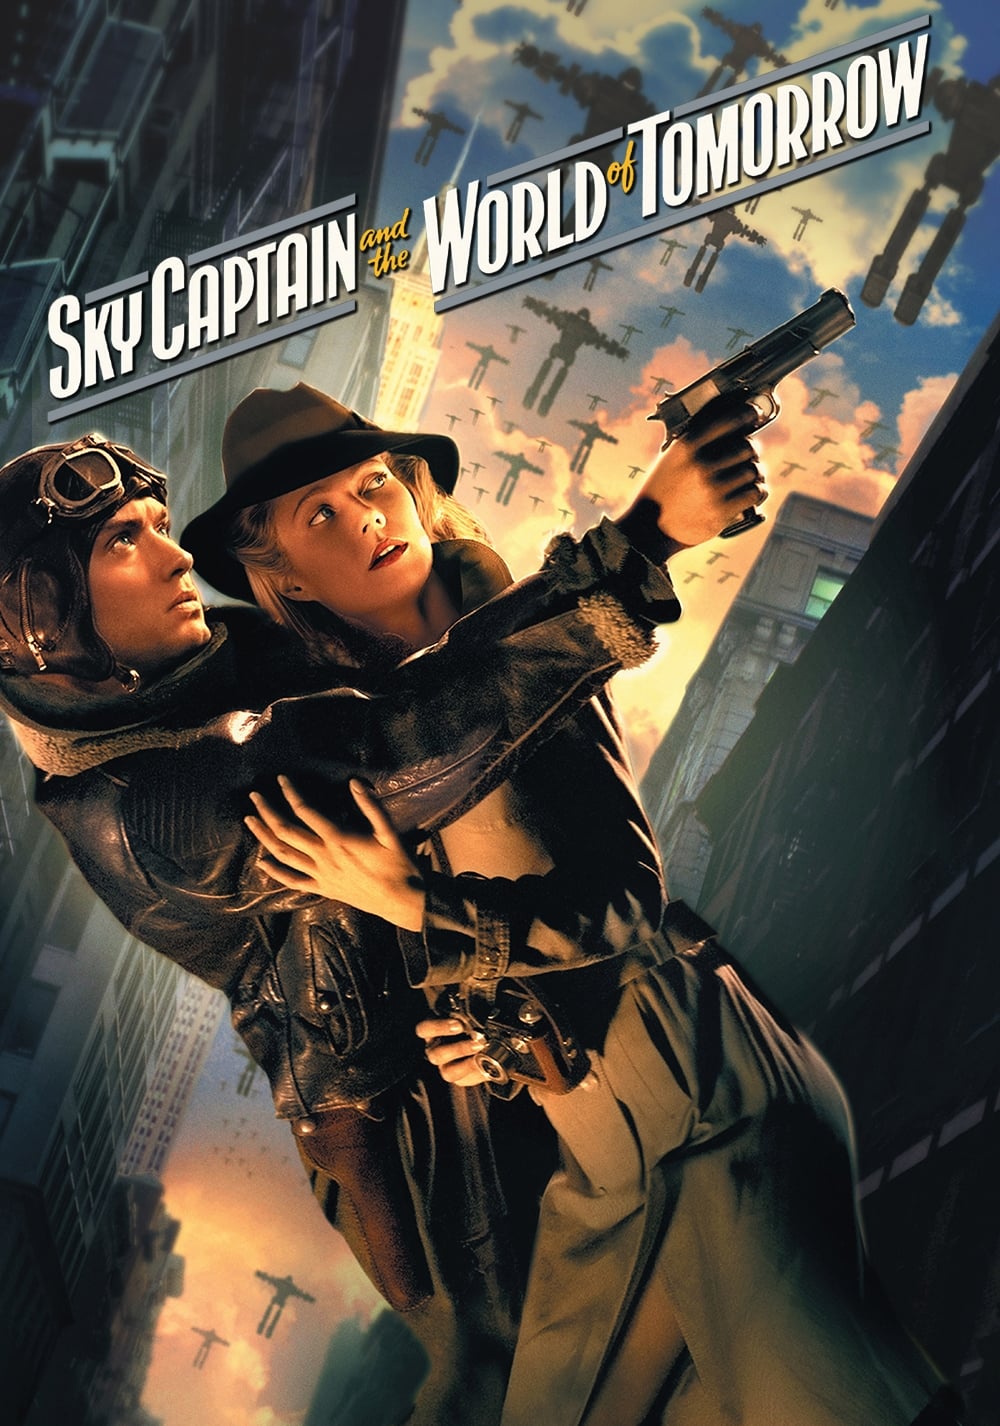 Sky Captain and the World of Tomorrow [HD] (2004)